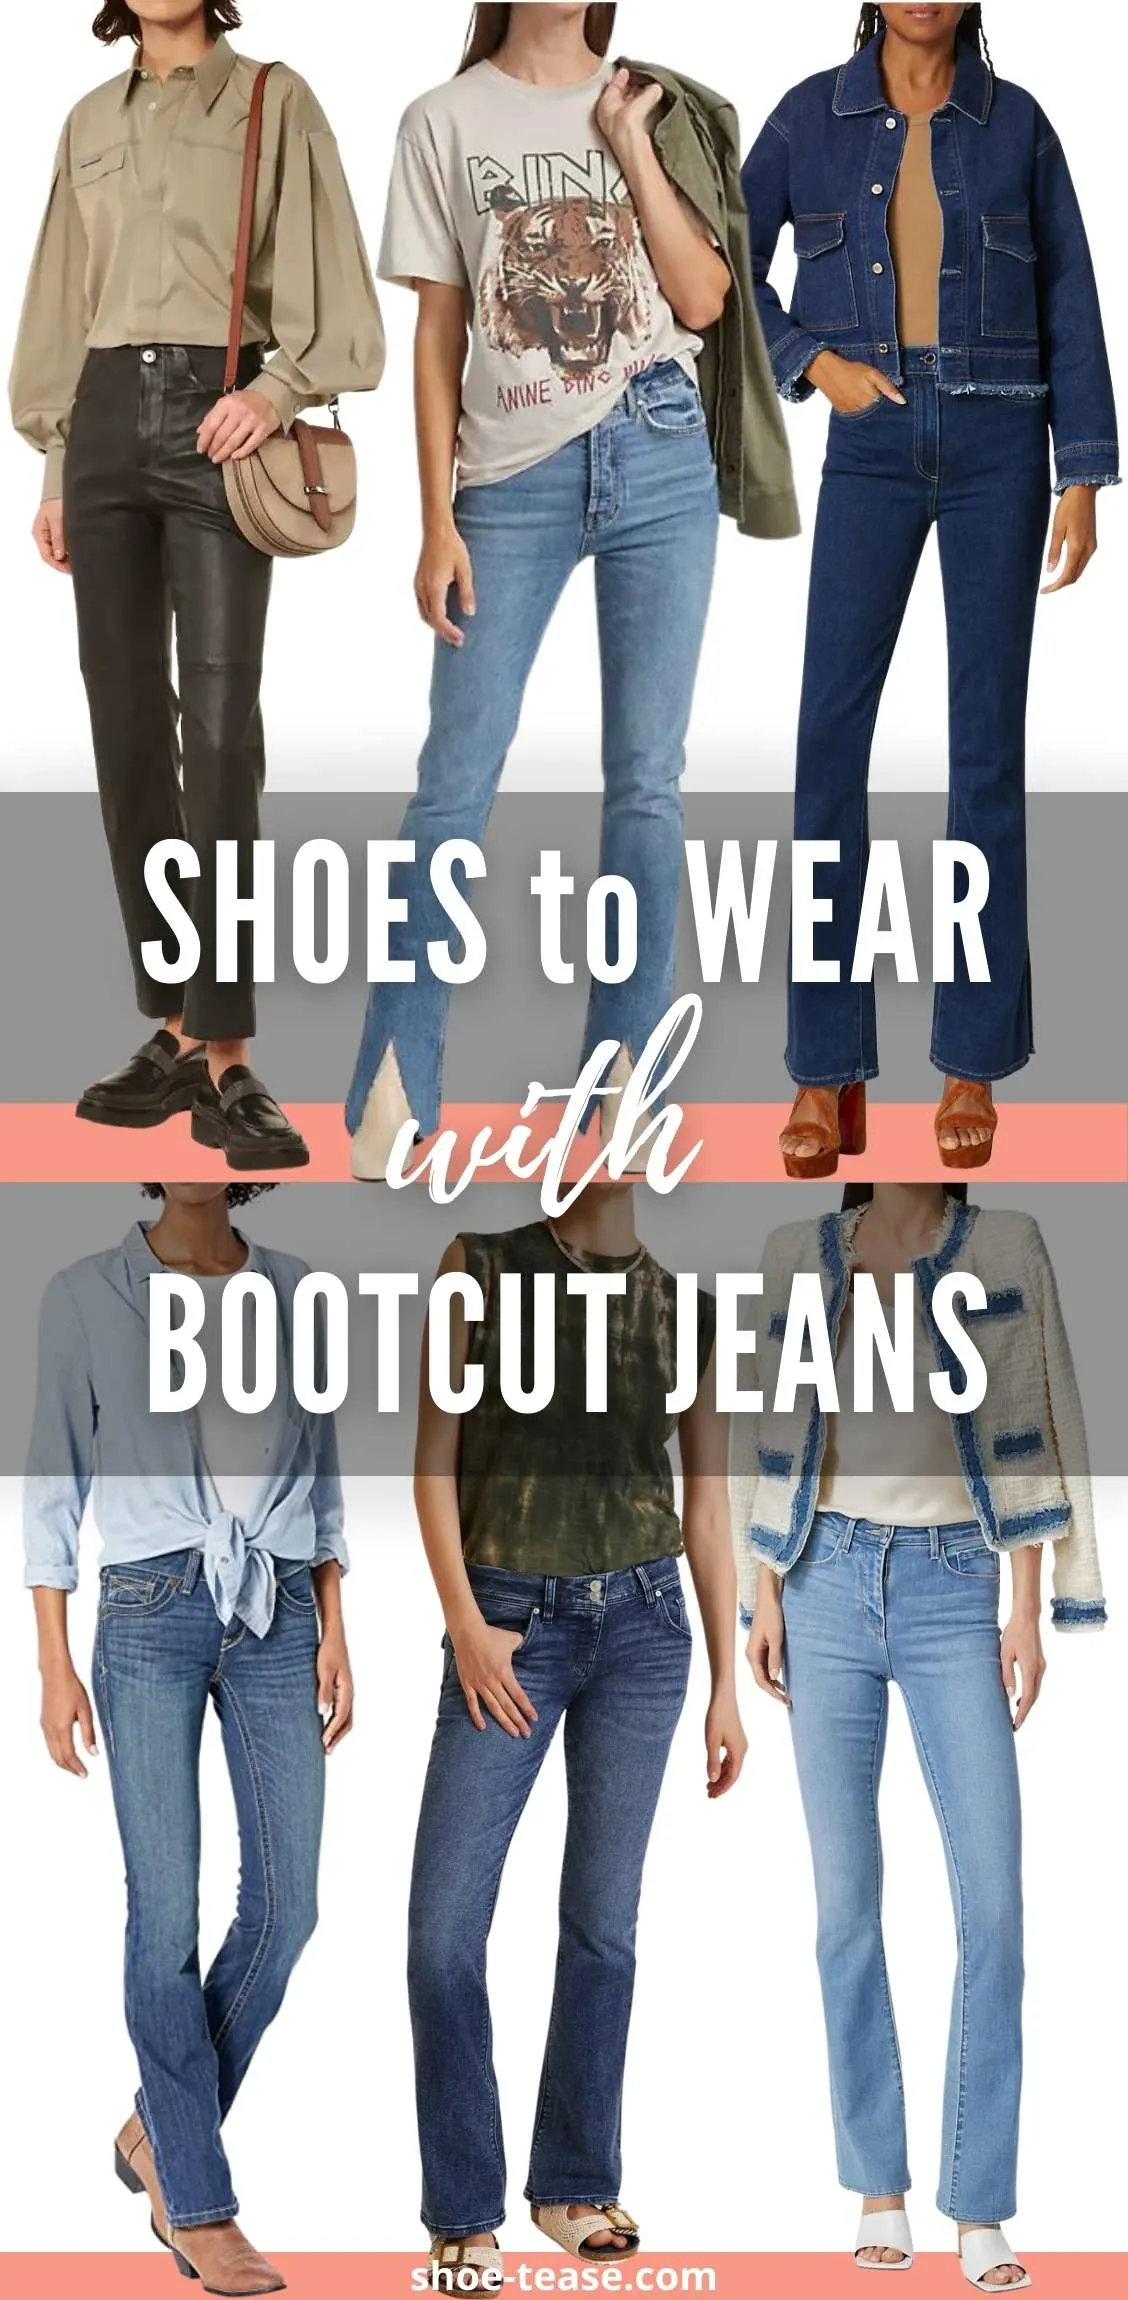 Shoes to wear with bootcut jeans outfits womens ShoeTease PIN.jpg